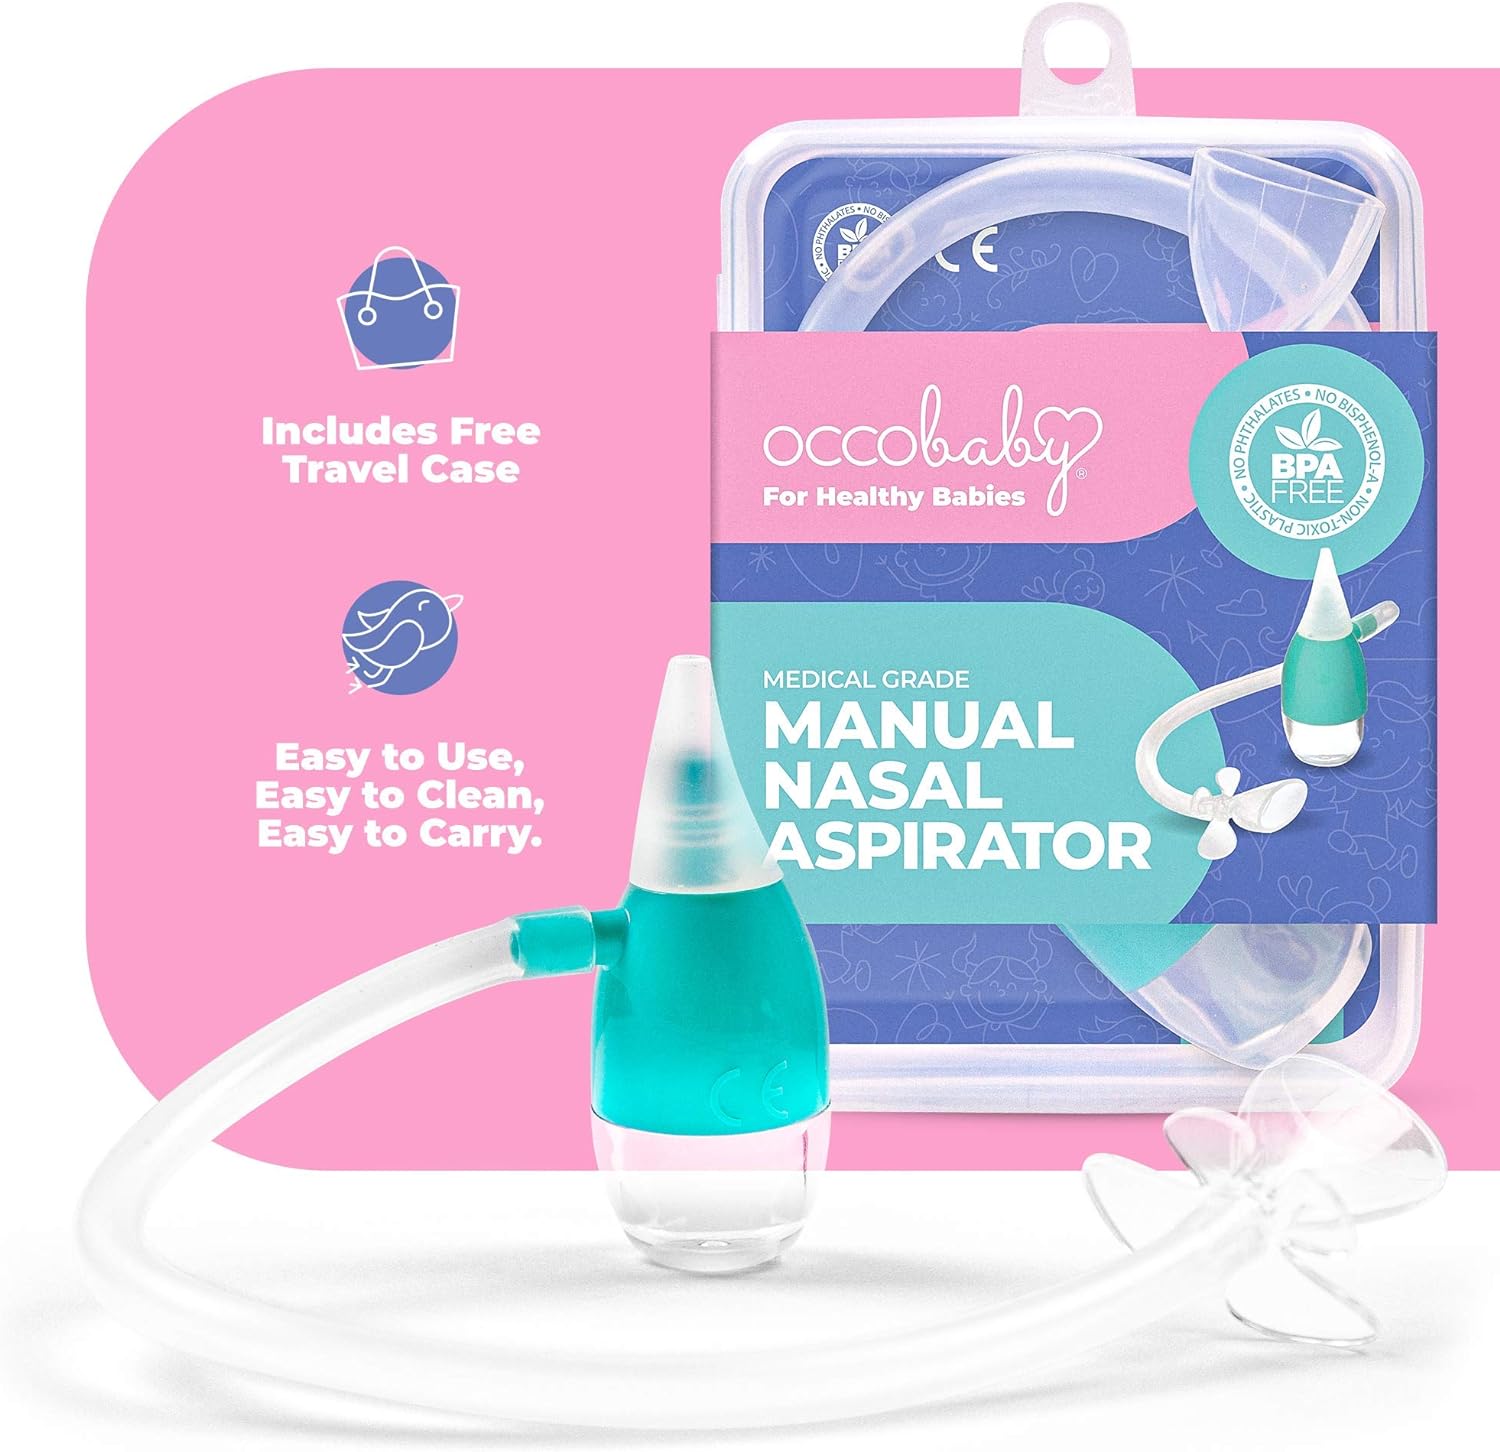 OCCObaby Manual Baby Nasal Aspirator - Nose Sucker for Toddlers and Newborns - Baby Congestion Relief - Aspirador Nasal para Bebes - Baby Nose Aspirator for Runny Nose Relief for Toddlers and Infants : Baby